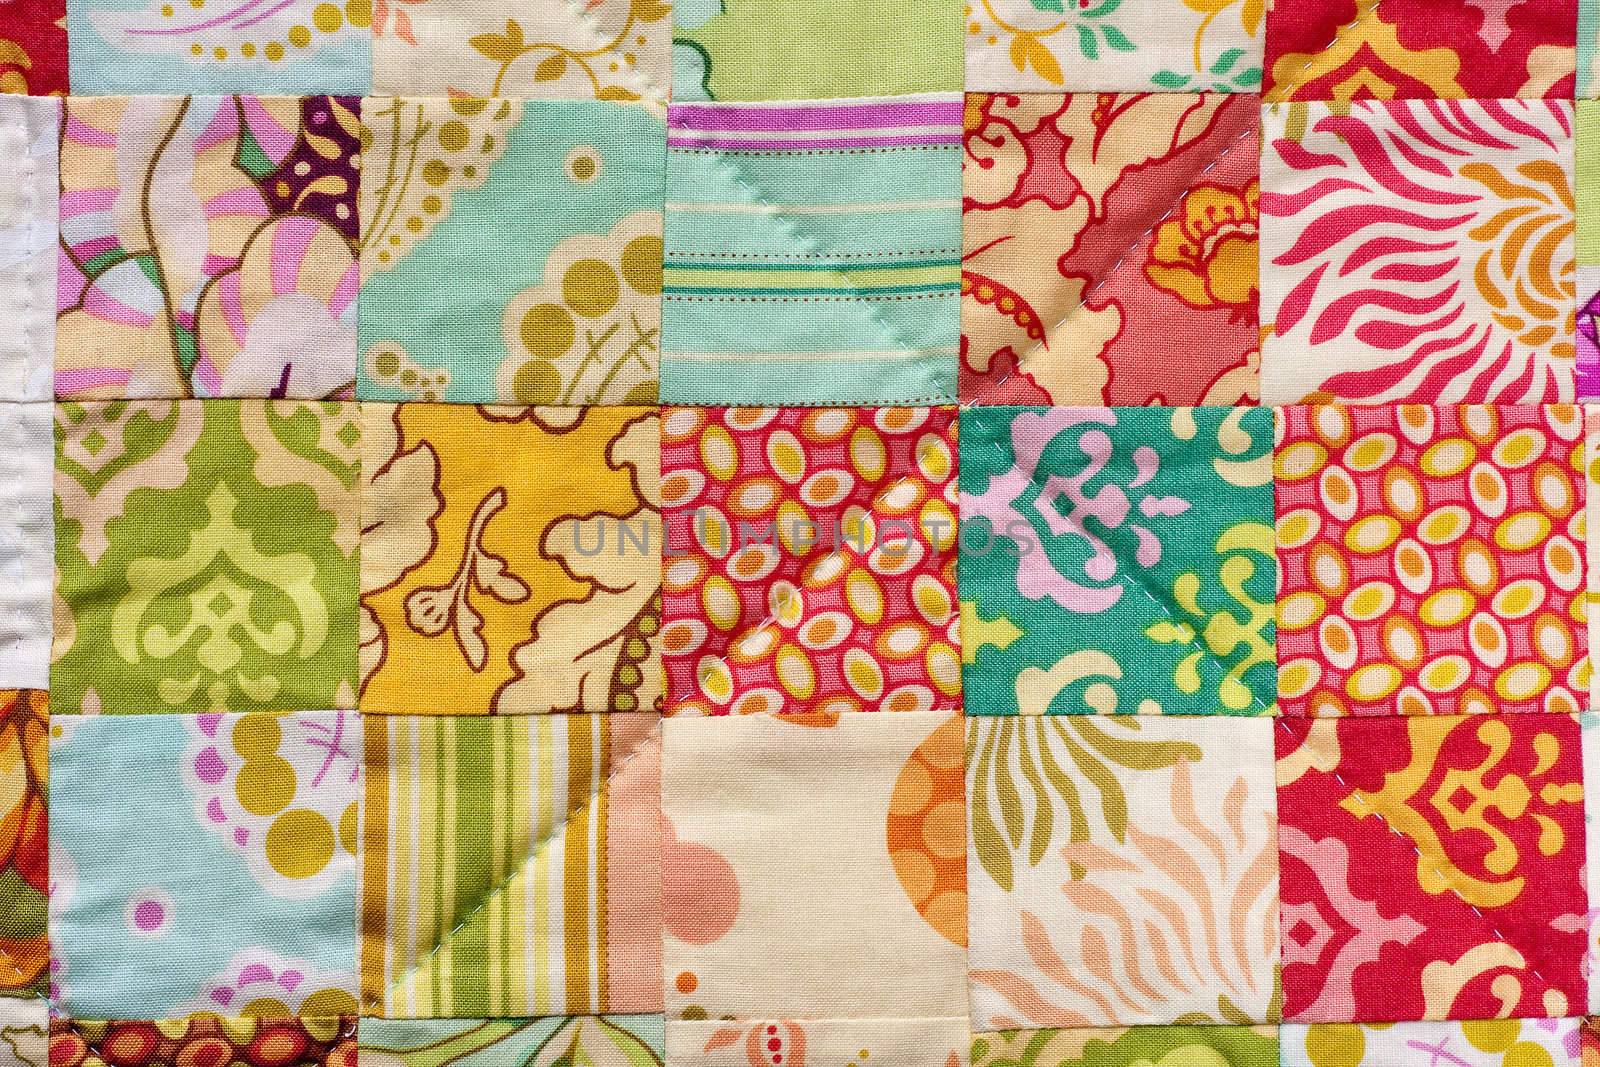 Handmade Patchwork Quilt by grandaded